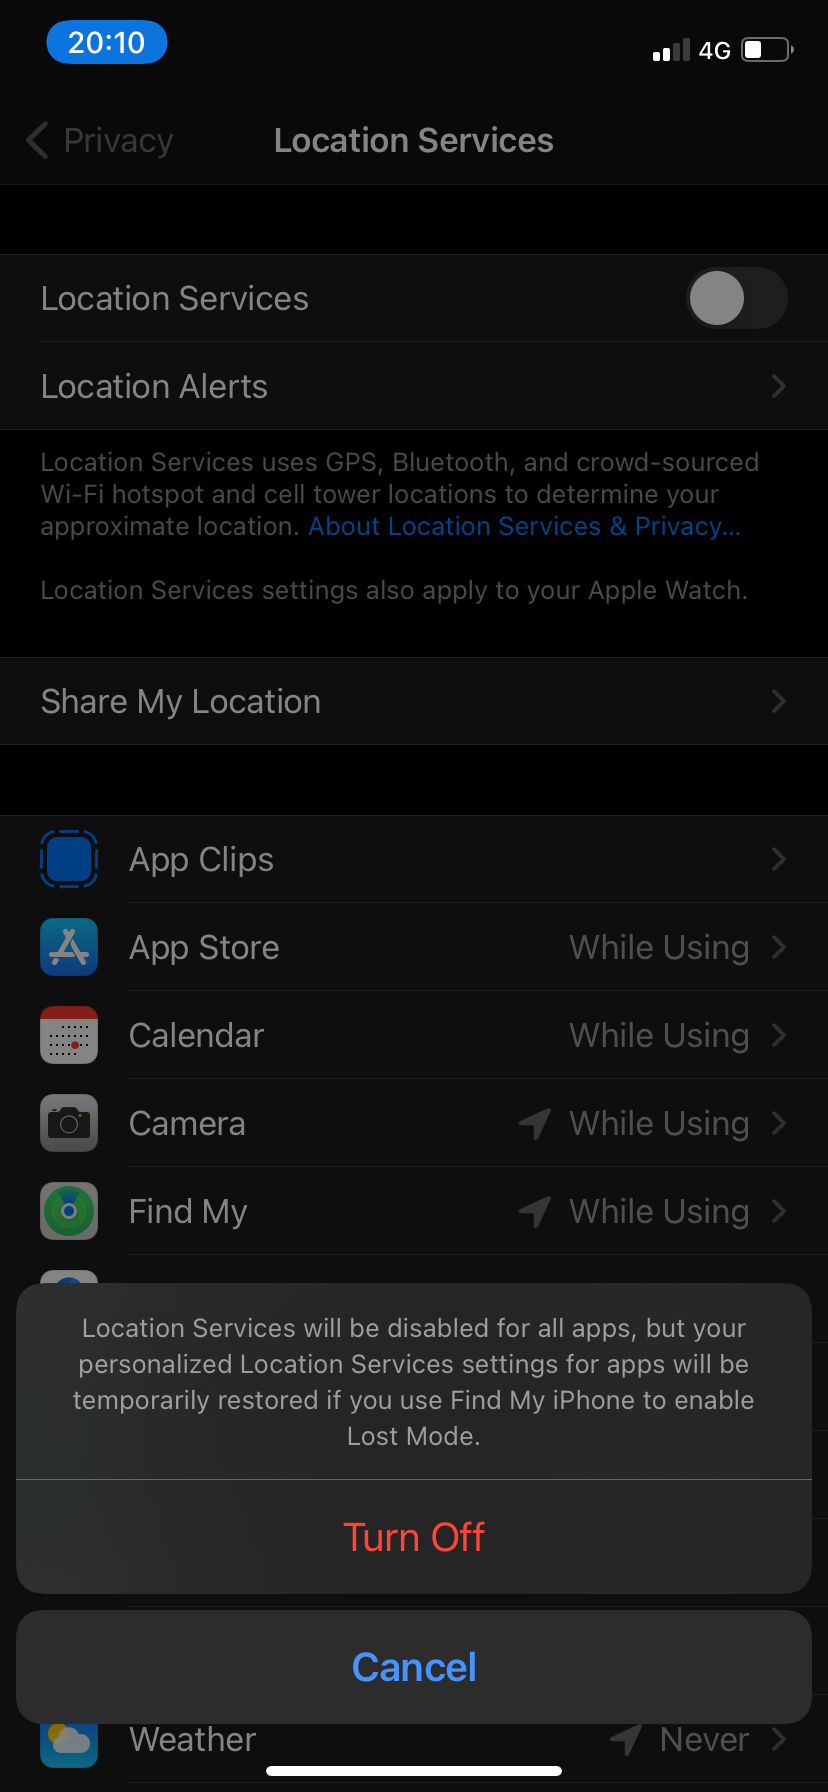 Disabling all Location Services.